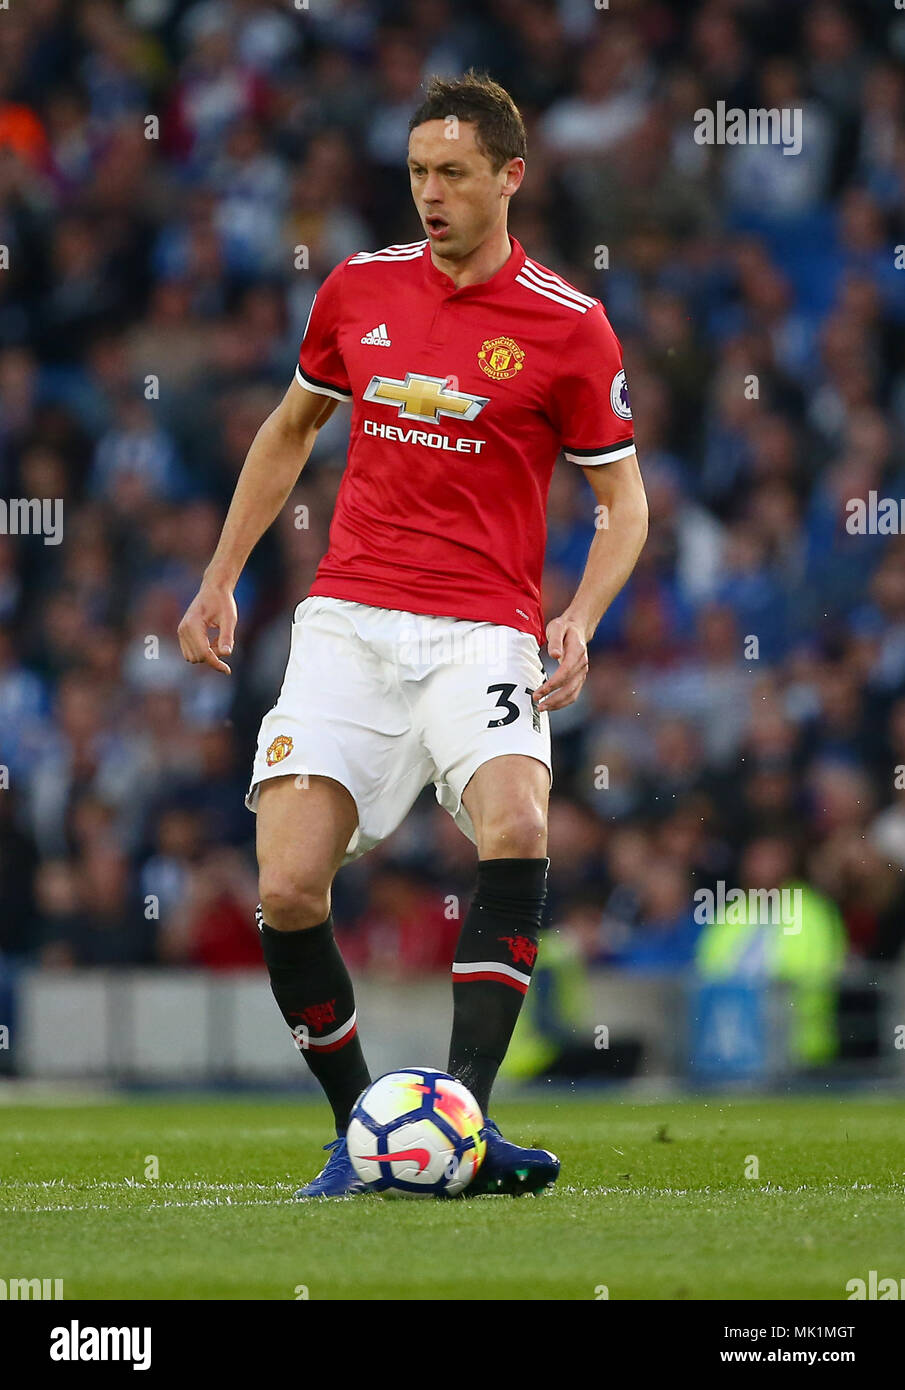 Nemanja Matic of Manchester United  during the Premier League match between Brighton and Hove Albion and Manchester United at the American Express Community Stadium in Brighton and Hove. 04 May 2018 *** EDITORIAL USE ONLY ***  No merchandising. For Football images FA and Premier League restrictions apply inc. no internet/mobile usage without FAPL license - for details contact Football Dataco Stock Photo